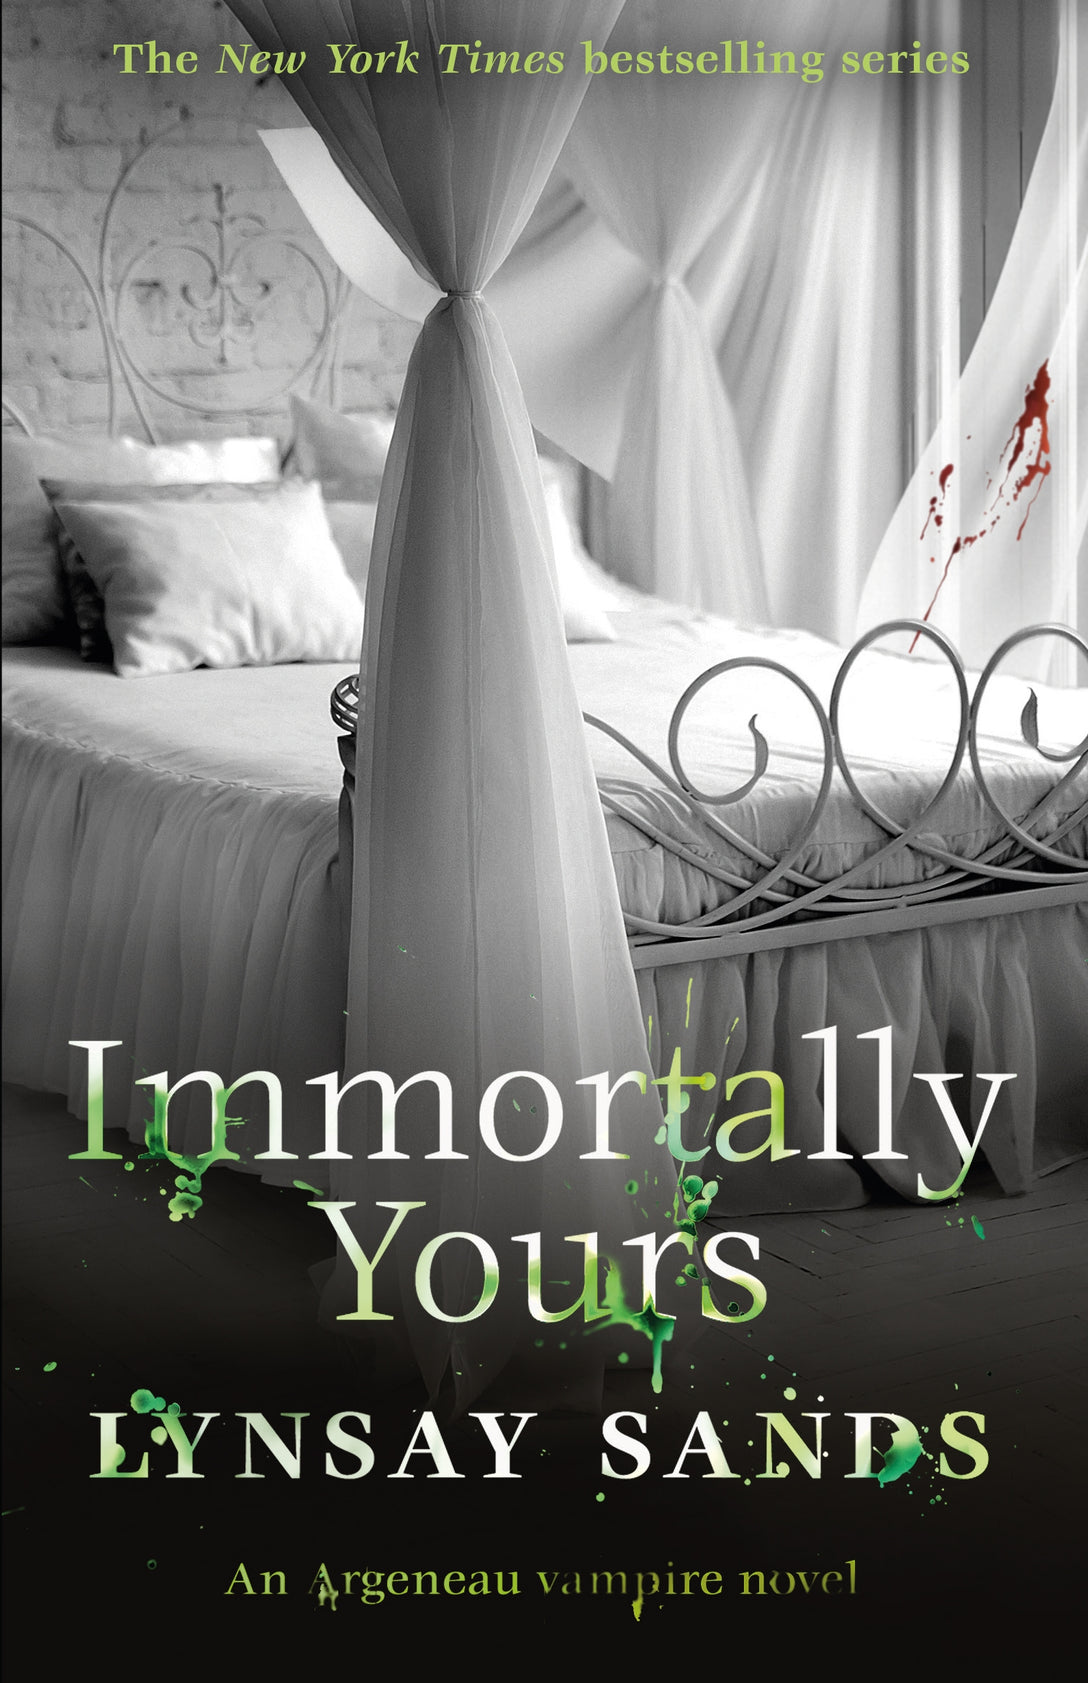 Immortally Yours by Lynsay Sands